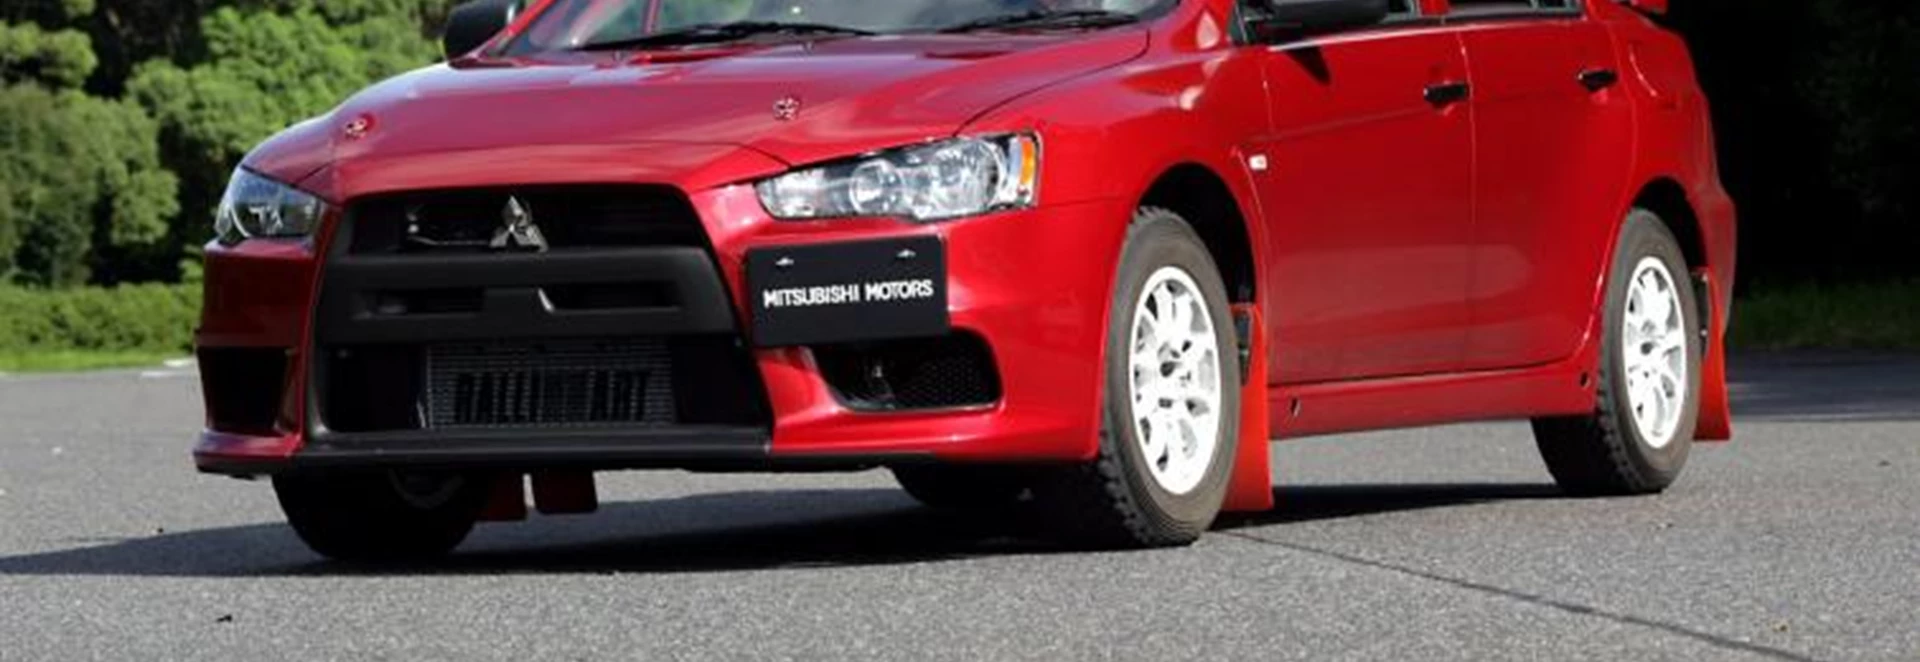 Why the Renault-Nissan takeover will likely mean the return of the Mitsubishi Evo